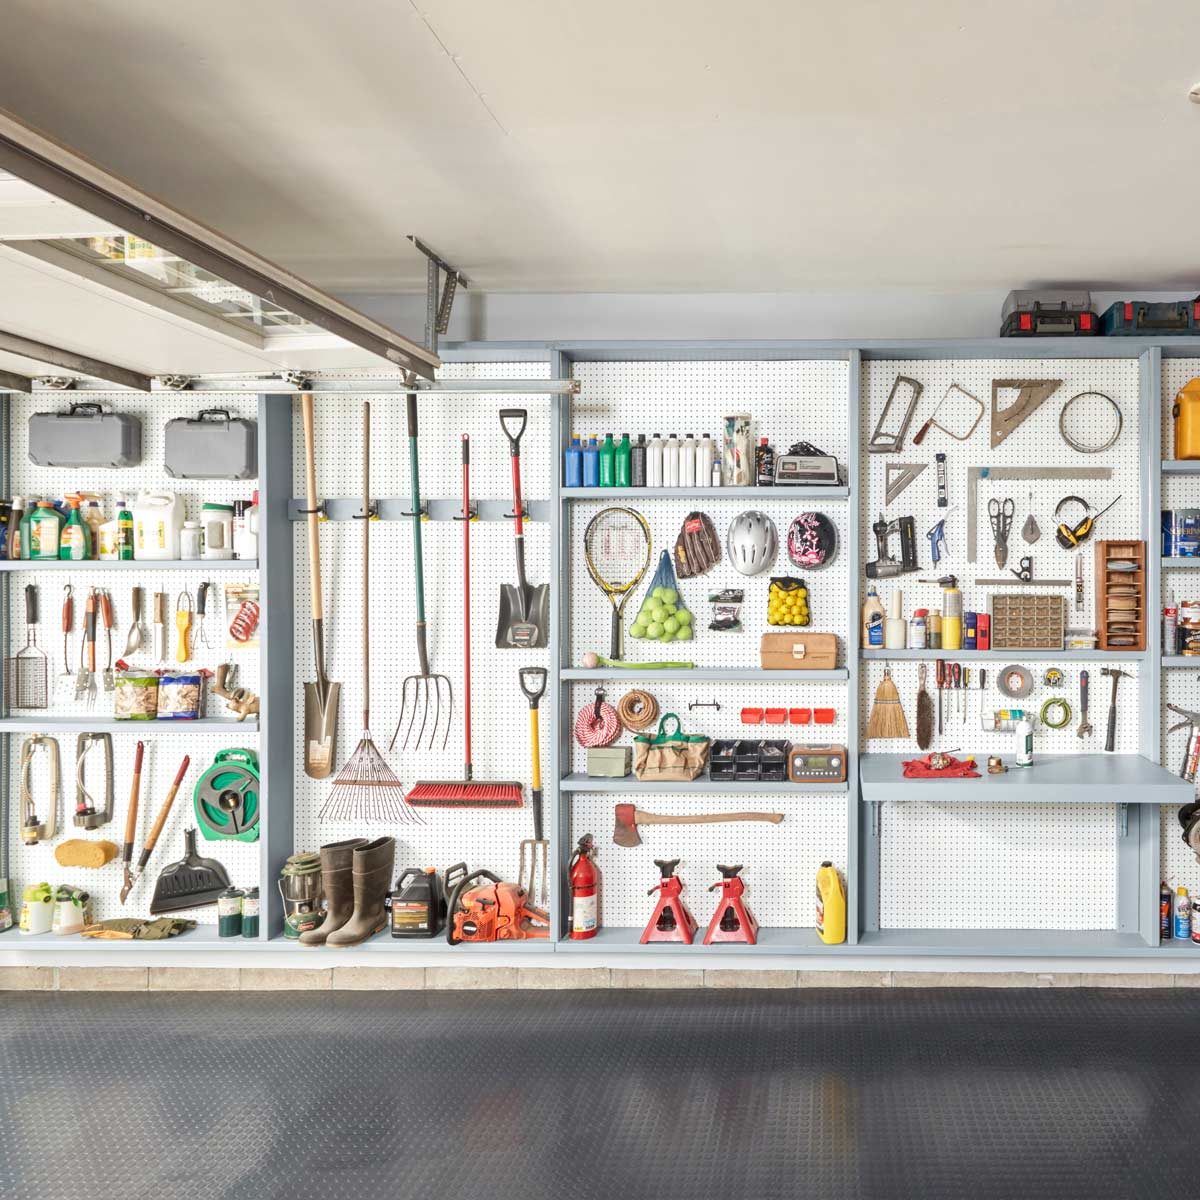 21 Top Tool Storage Tips, Tricks and Ideas